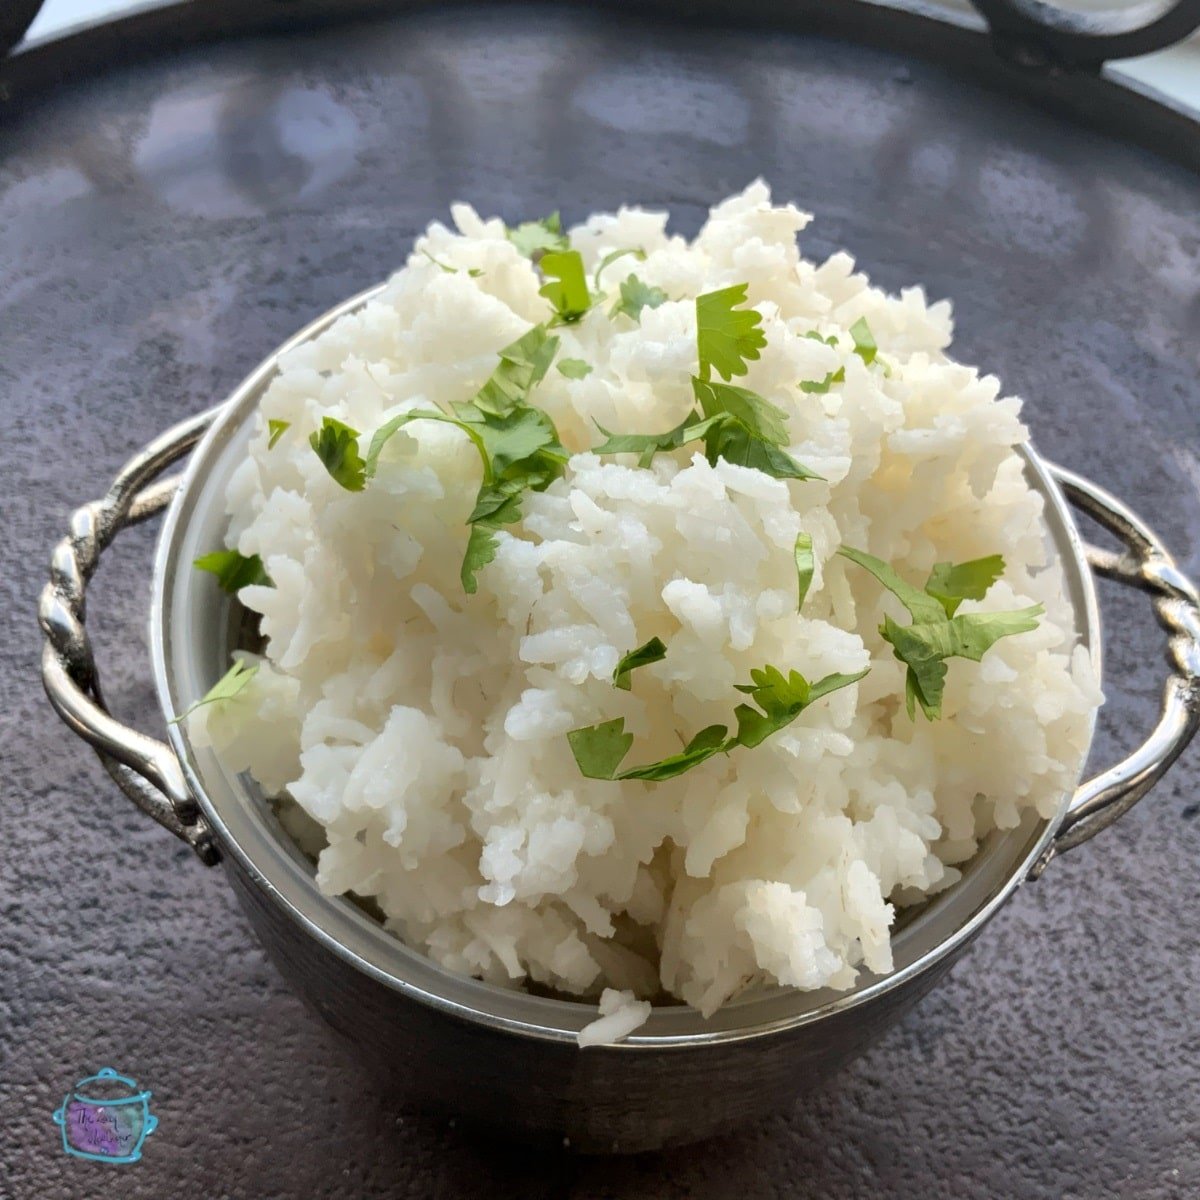 Lazy Slow Cooker Rice Recipe - The Lazy Slow Cooker